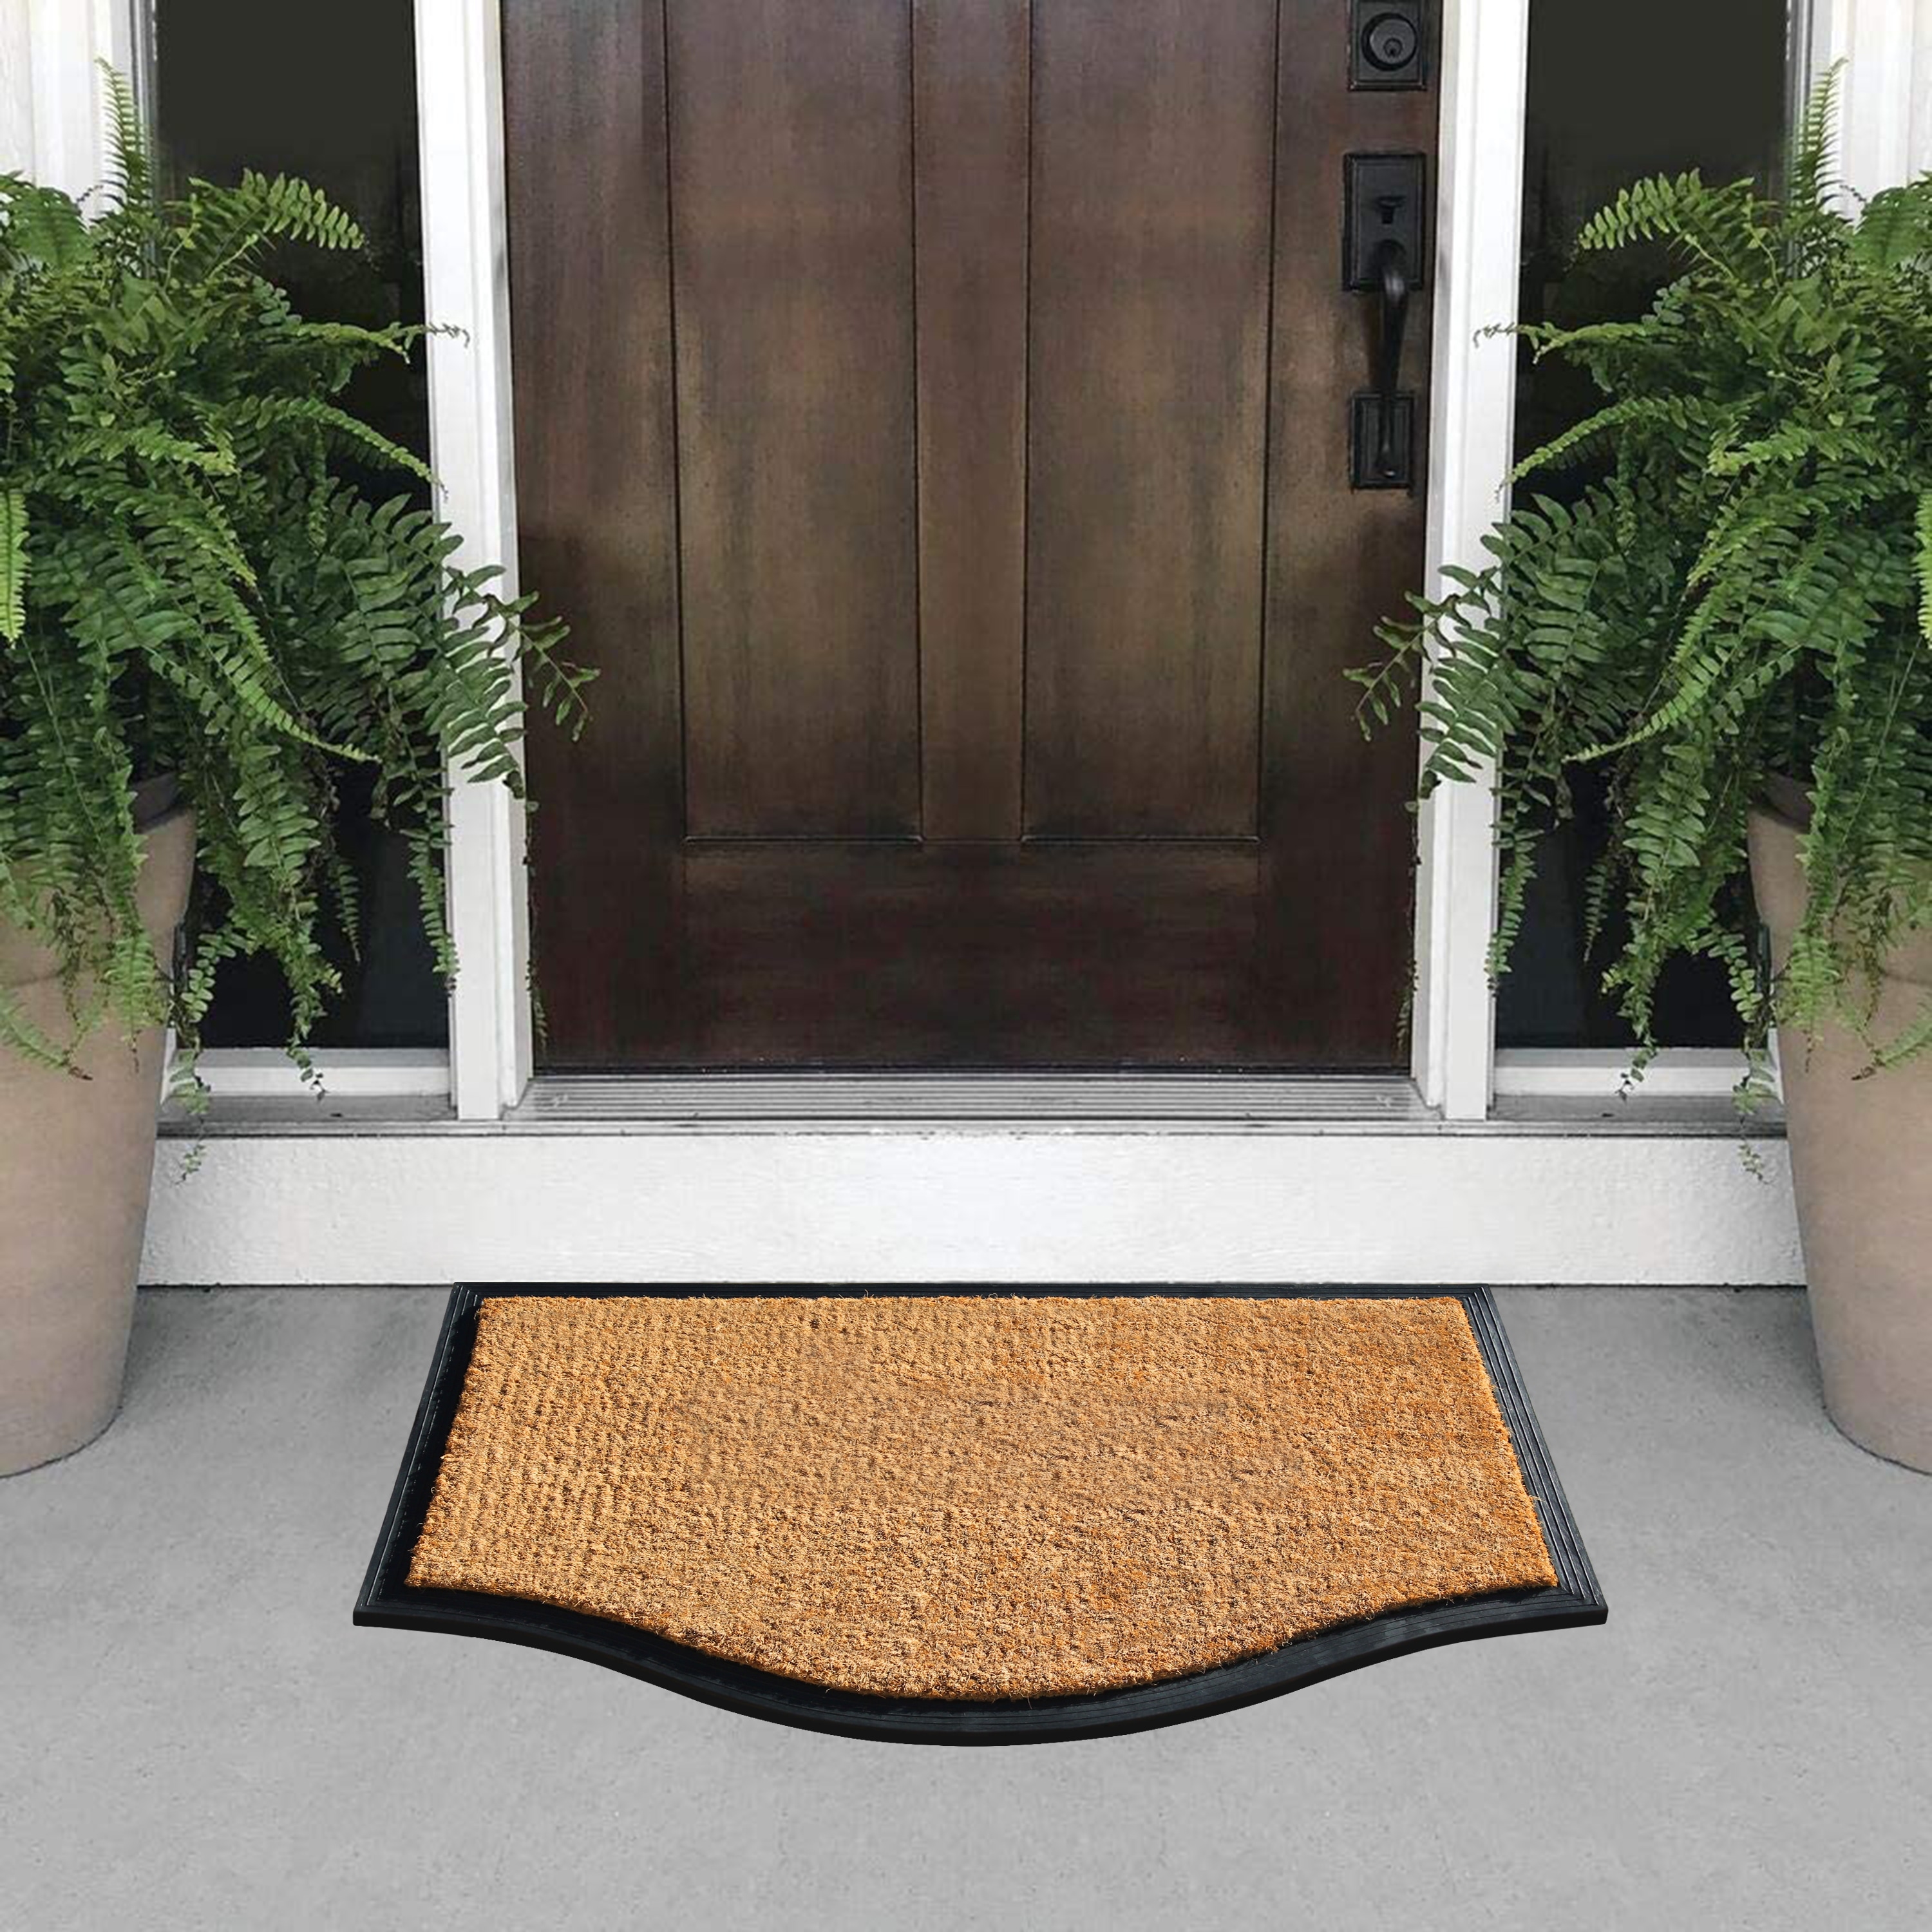 https://ak1.ostkcdn.com/images/products/is/images/direct/bafe8da0685f6dacbe114000d8f6a59913041347/A1HC-Welcome-Rubber-and-Coir-Large-Heavy-Duty-Outdoor-Doormat%2C-24%22X38%22%2C-Black.jpg